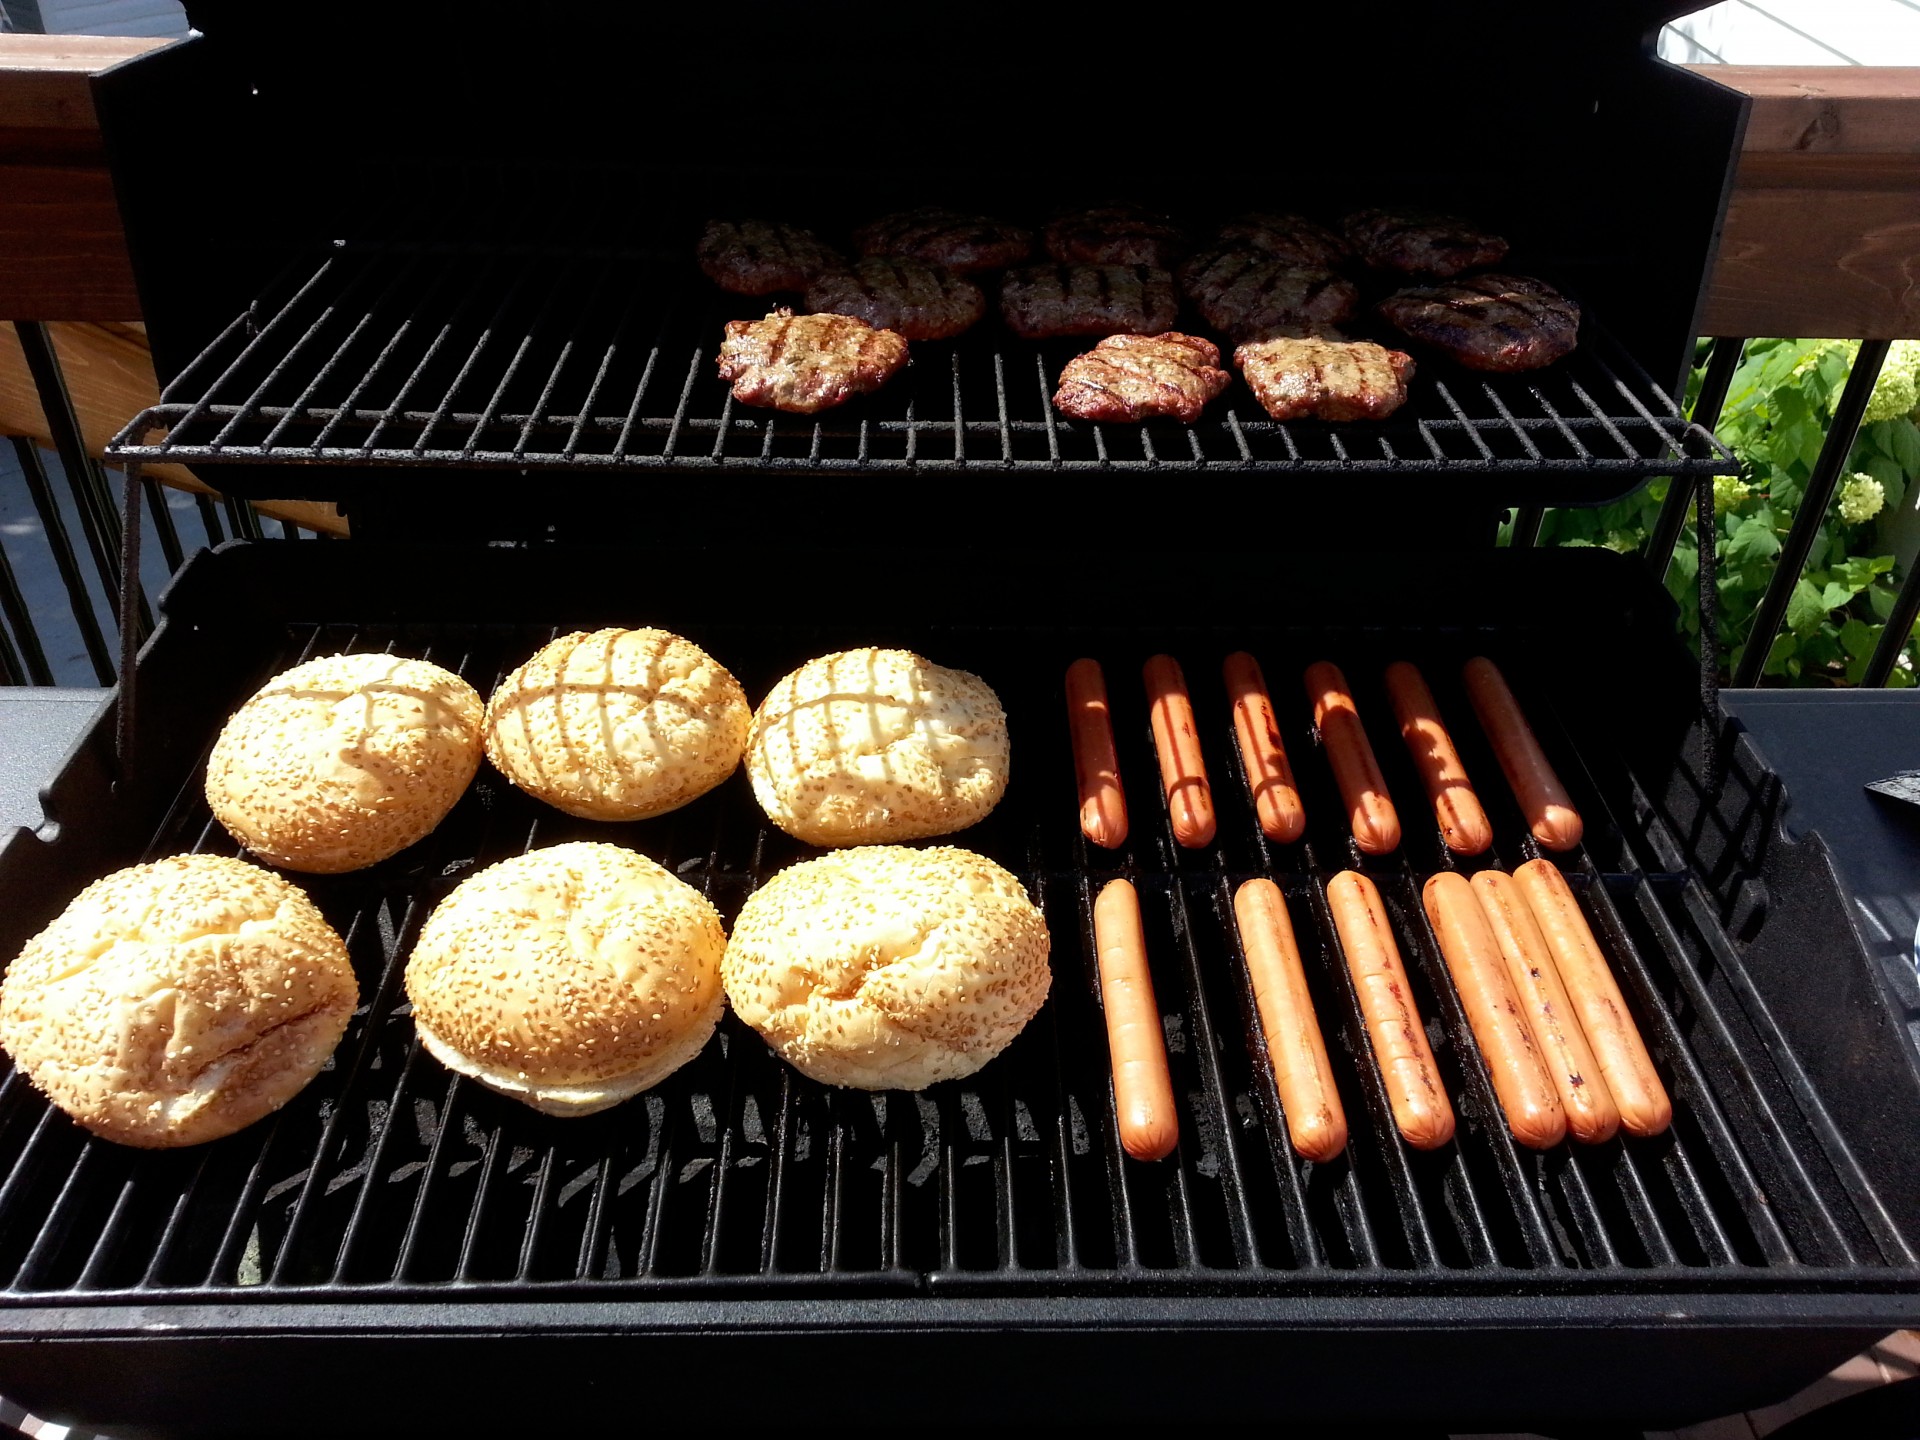 Sausages and Beefburgers on a BBQ